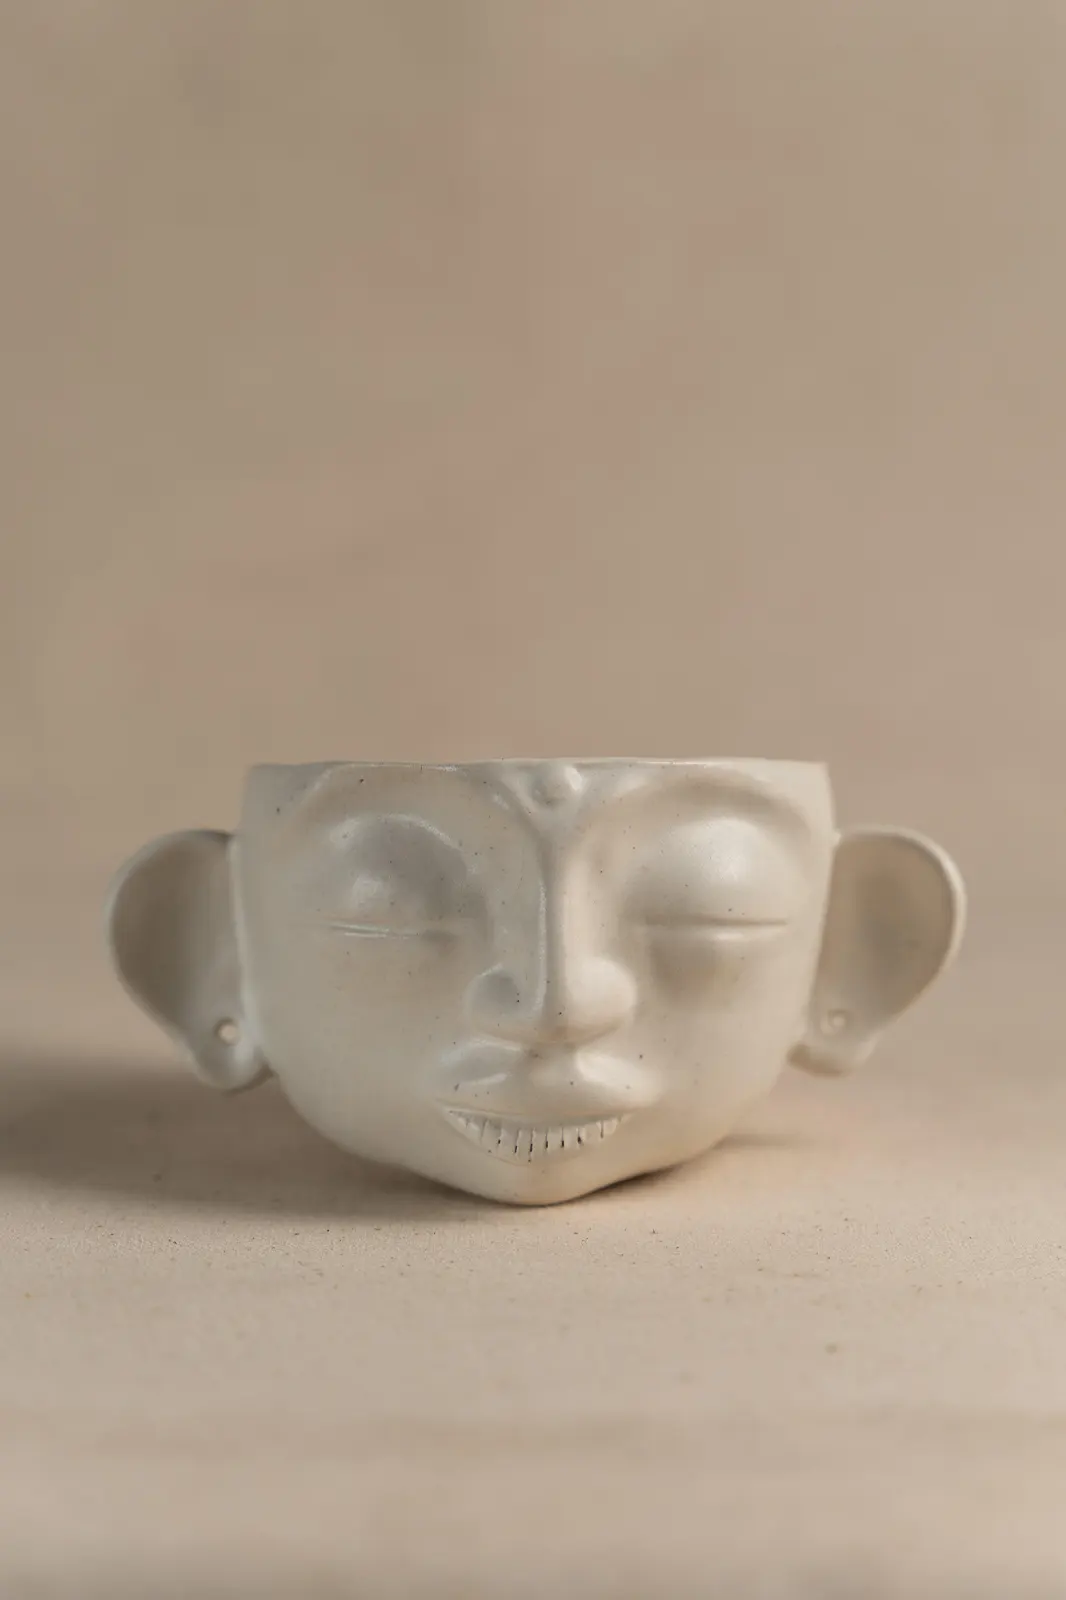 White monk ceramic planter toh with ear, face shape planter, ceramic planter pots, small planter pots, handmade planter, planter pots, planter pots indoor, Toh, Sepia Stories, ceramic planter, small pots, black pots, table pots, indoor pots, handmade pots, indoor planters, tree planters, pots & planters, ceramic planter